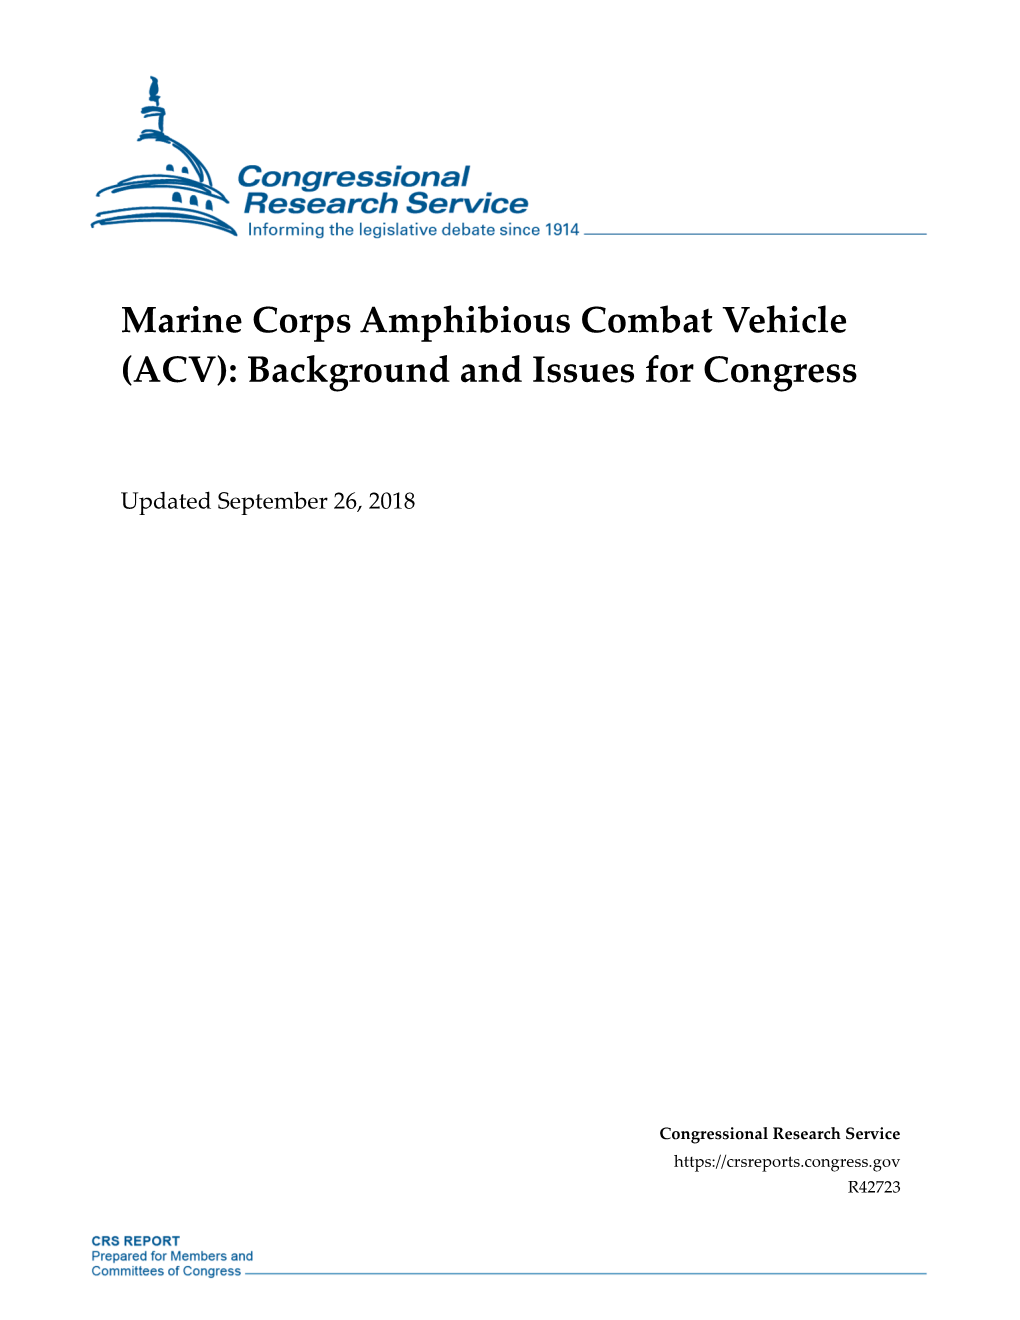 Marine Corps Amphibious Combat Vehicle (ACV): Background and Issues for Congress